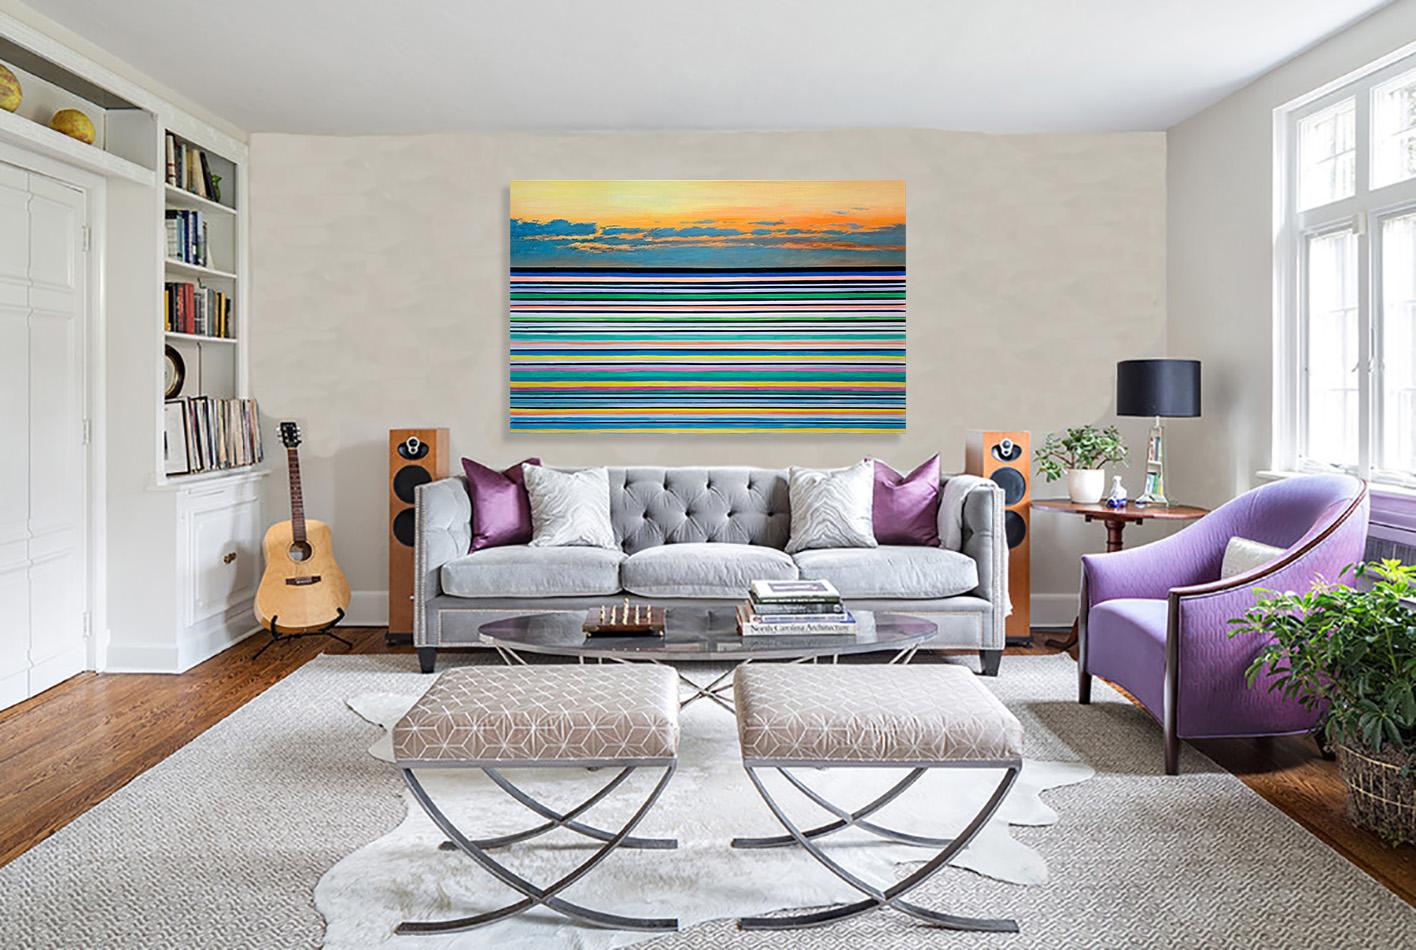 Horizon by Kate Seaborne - contemporary seascape painting Blue Ocean 7